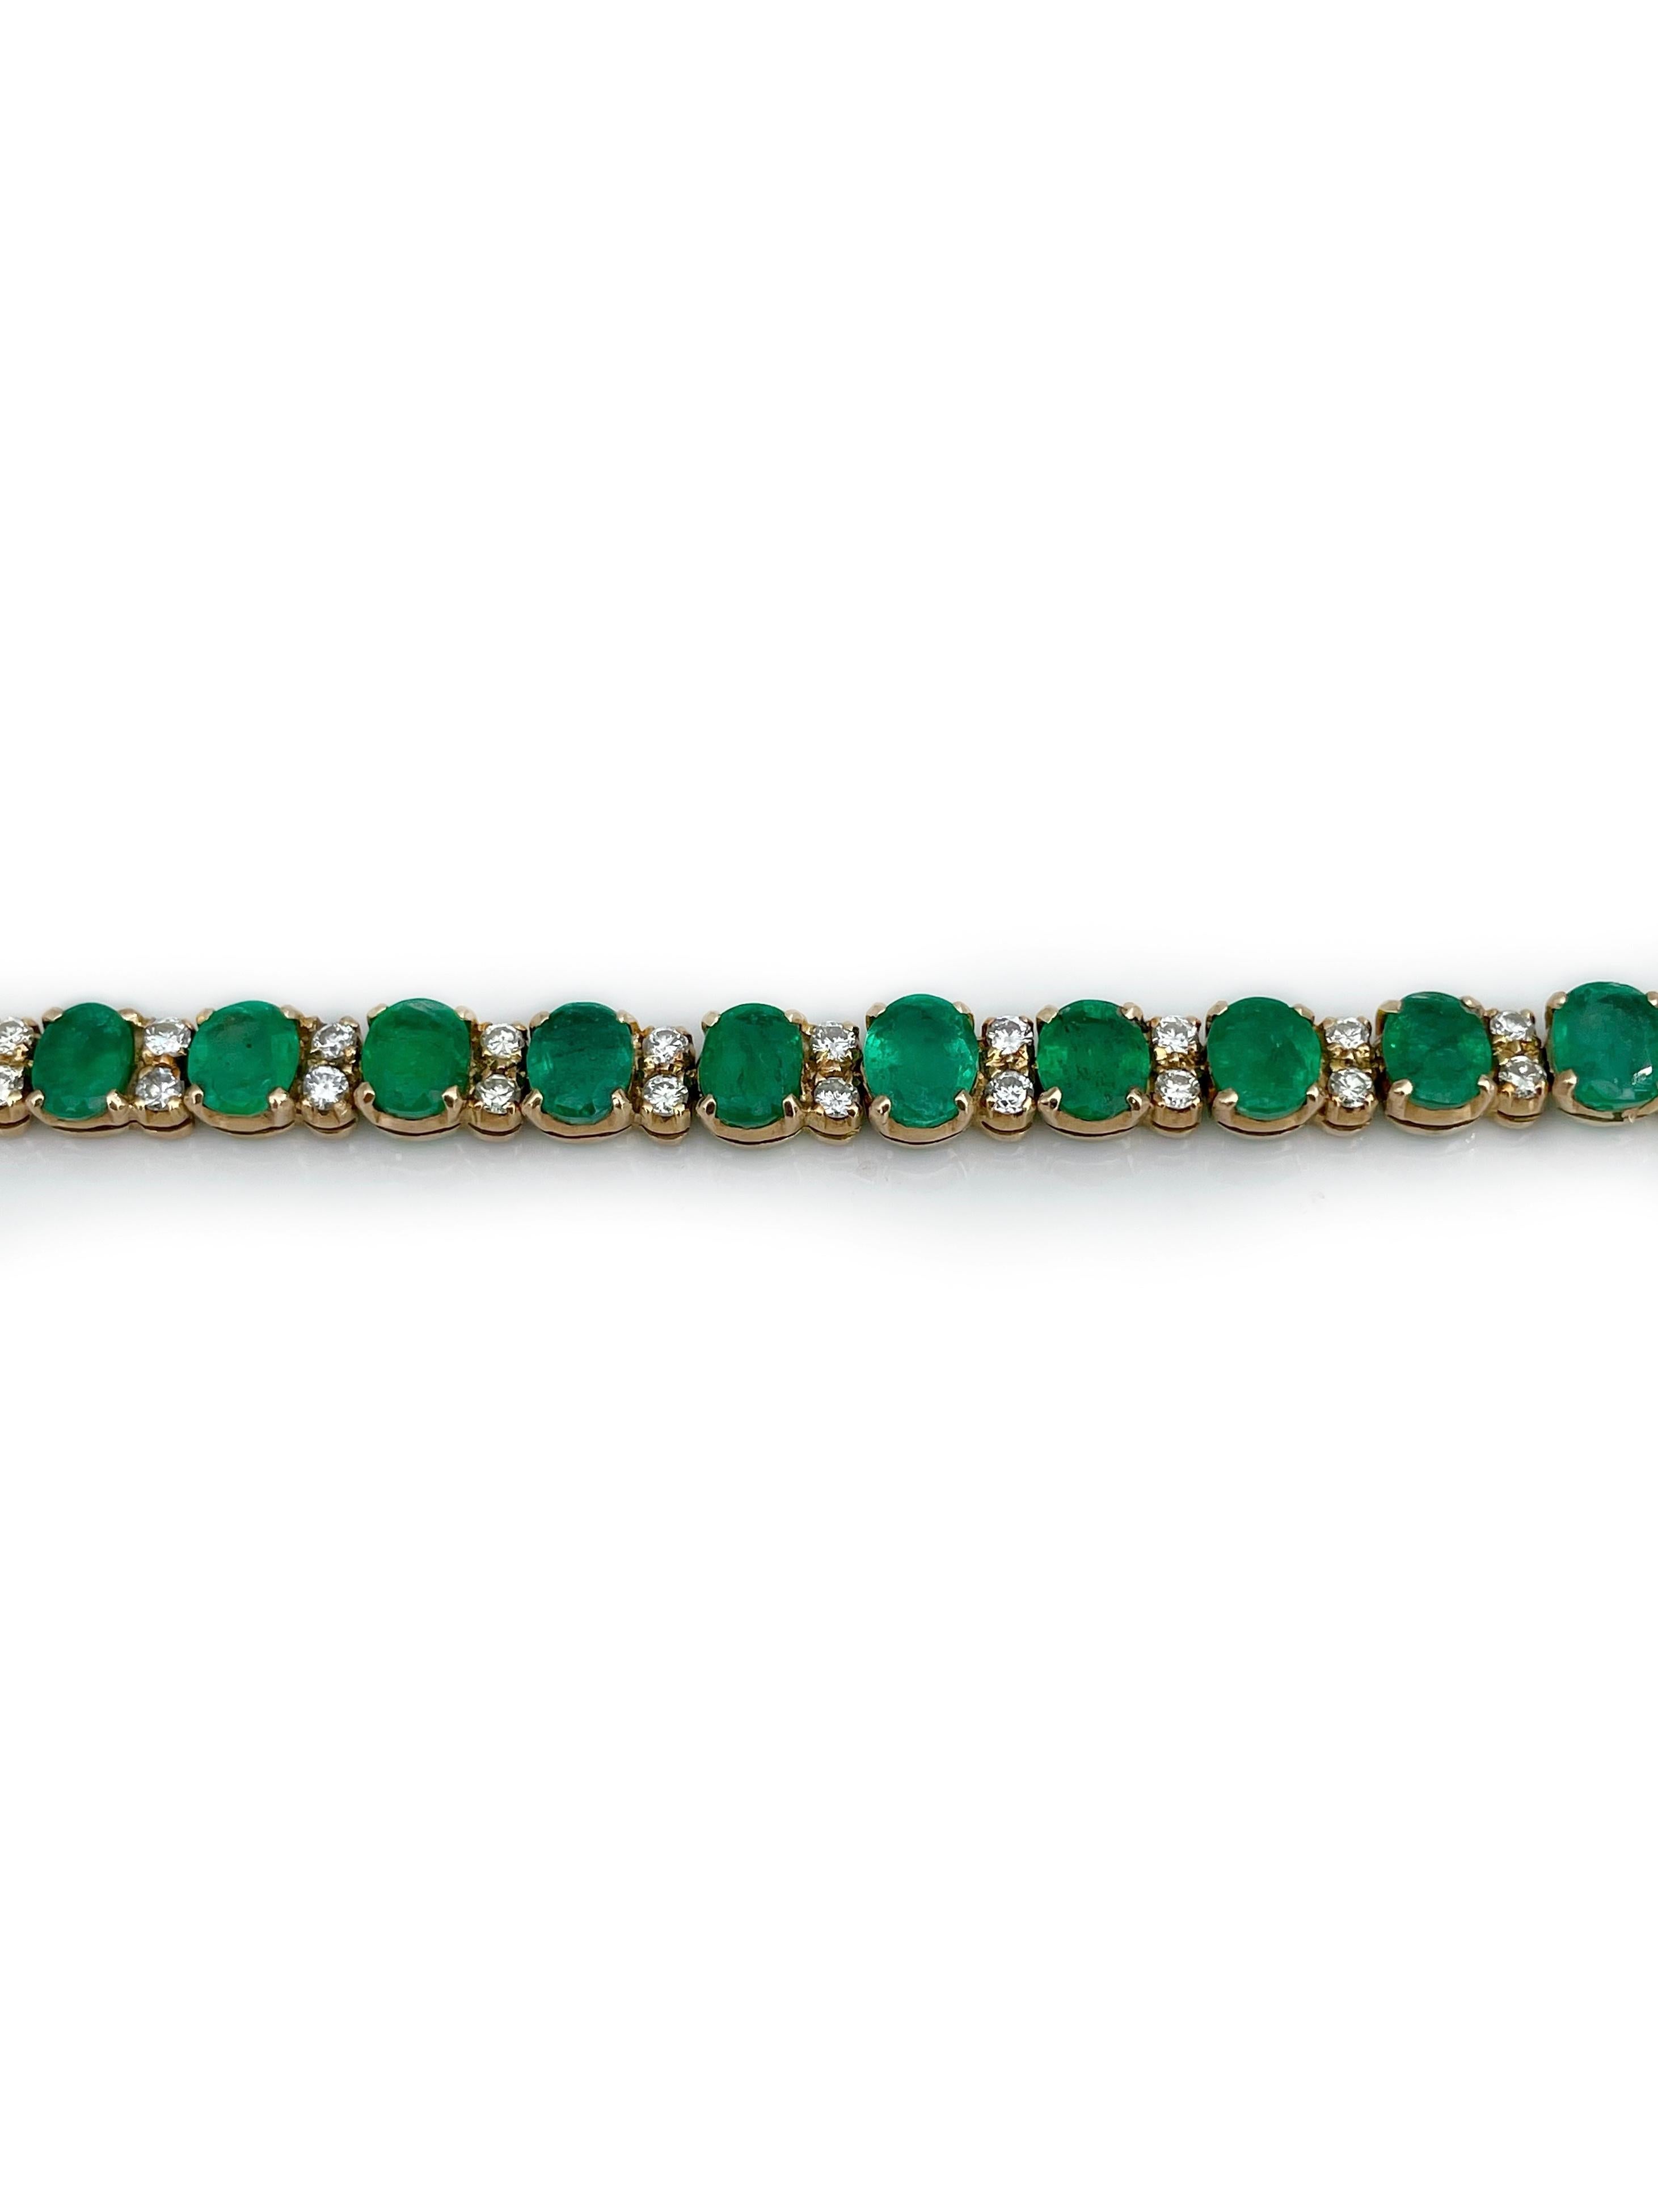 This is an amazing vintage tennis bracelet crafted in 18K yellow gold. The piece features:
- 33 oval cut emeralds: TW 5.80ct, vslbG 5/4, SI-P1
- 66 round brilliant cut diamonds: TW 0.45ct, RW-W, VS-SI

Has a safe closure. 

Weight: 8.31g
Length: